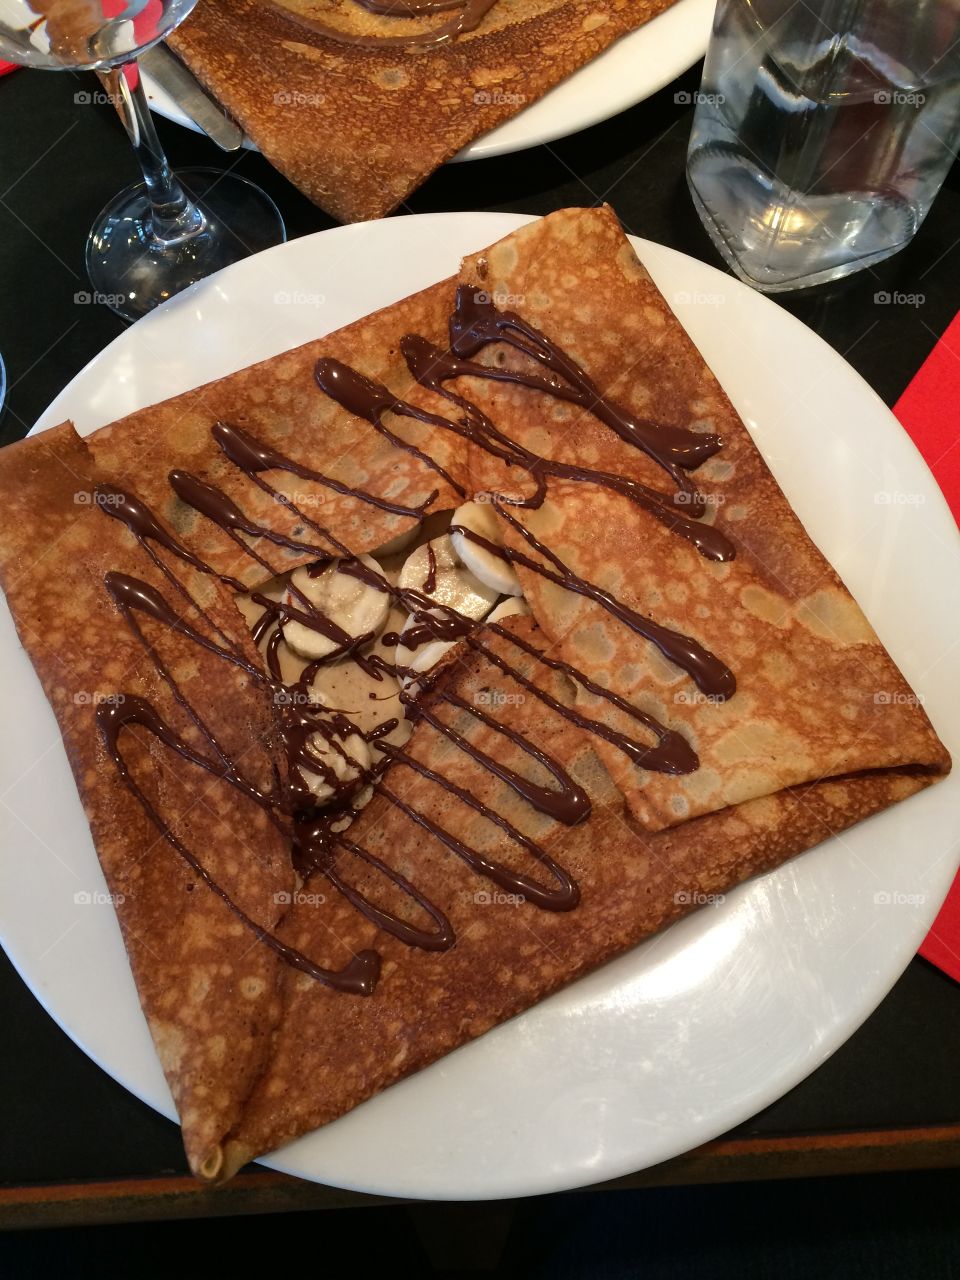 A famous French crepe